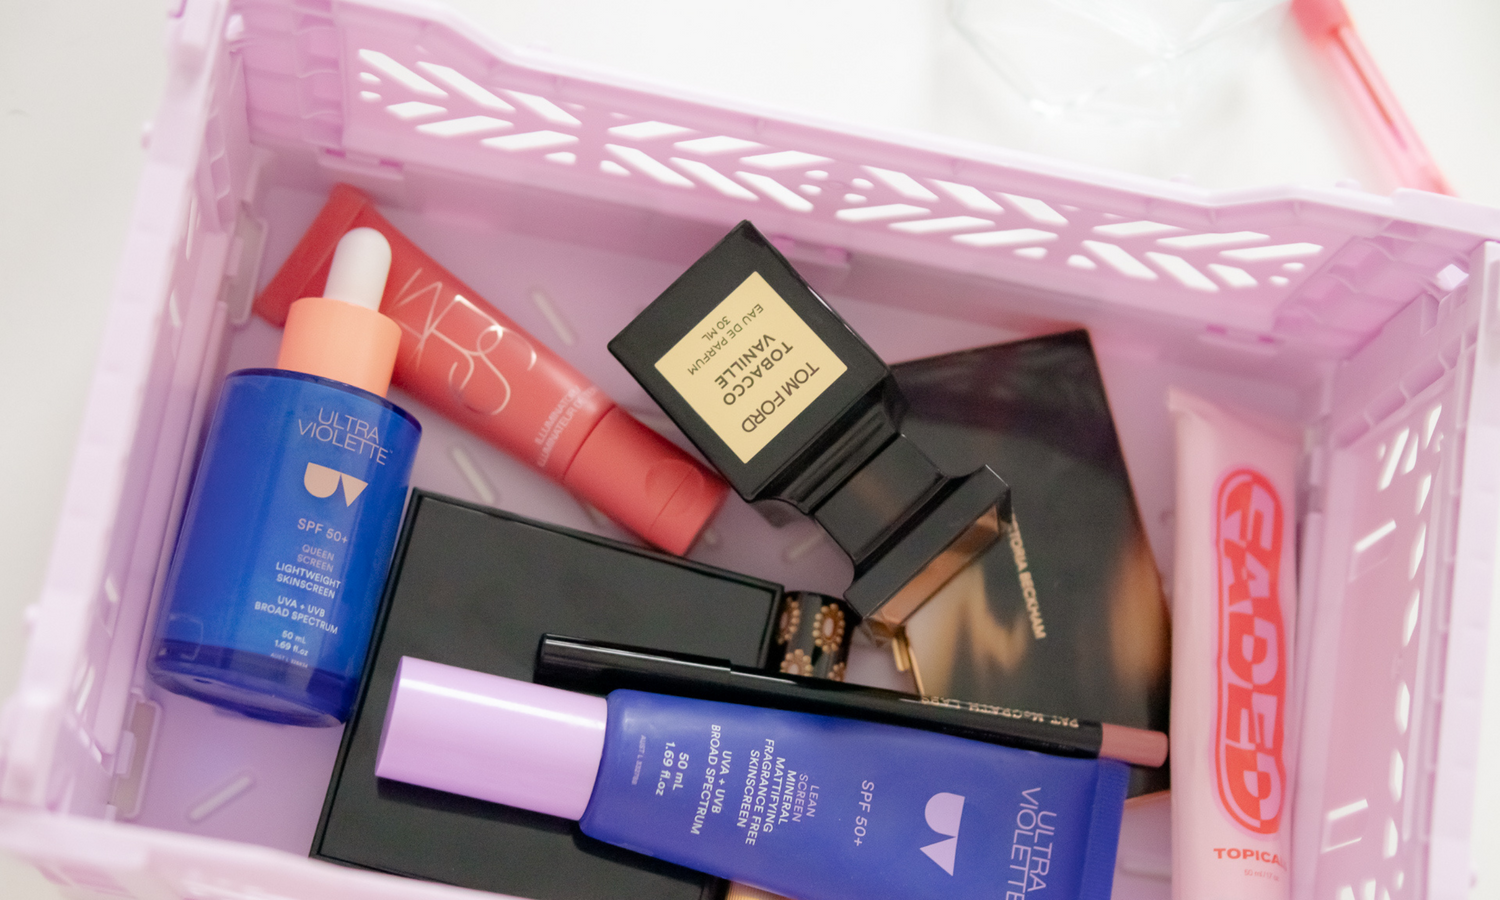 Ultra Violette Lean Screen and Queen Screen in a beauty basket alongside other beauty products.